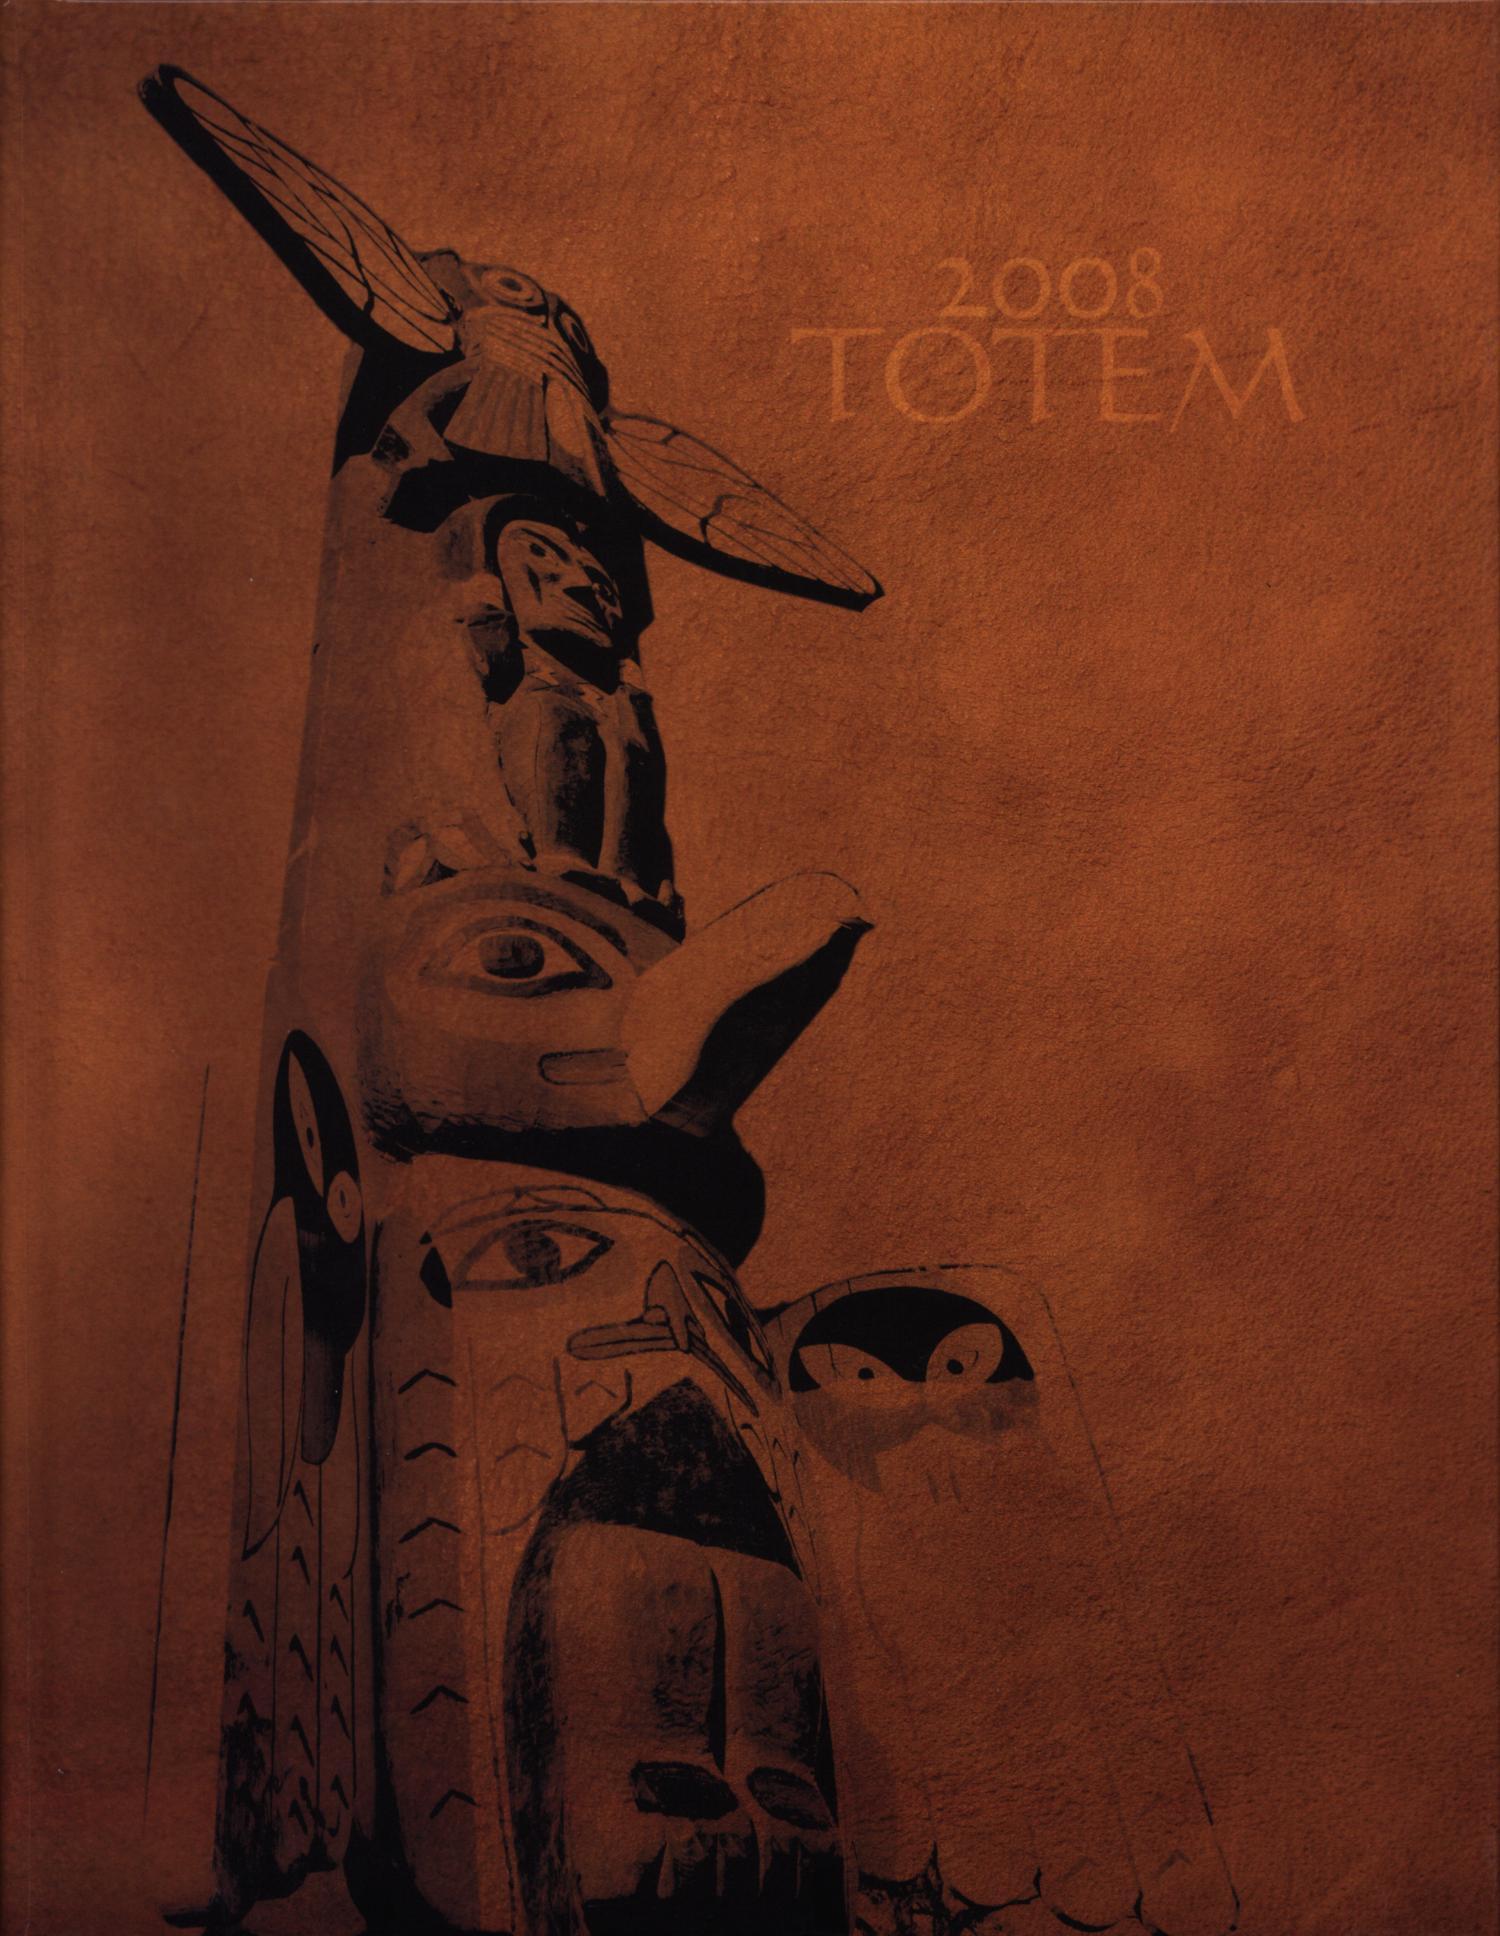 The Totem, Yearbook of McMurry University, 2008
                                                
                                                    Front Cover
                                                